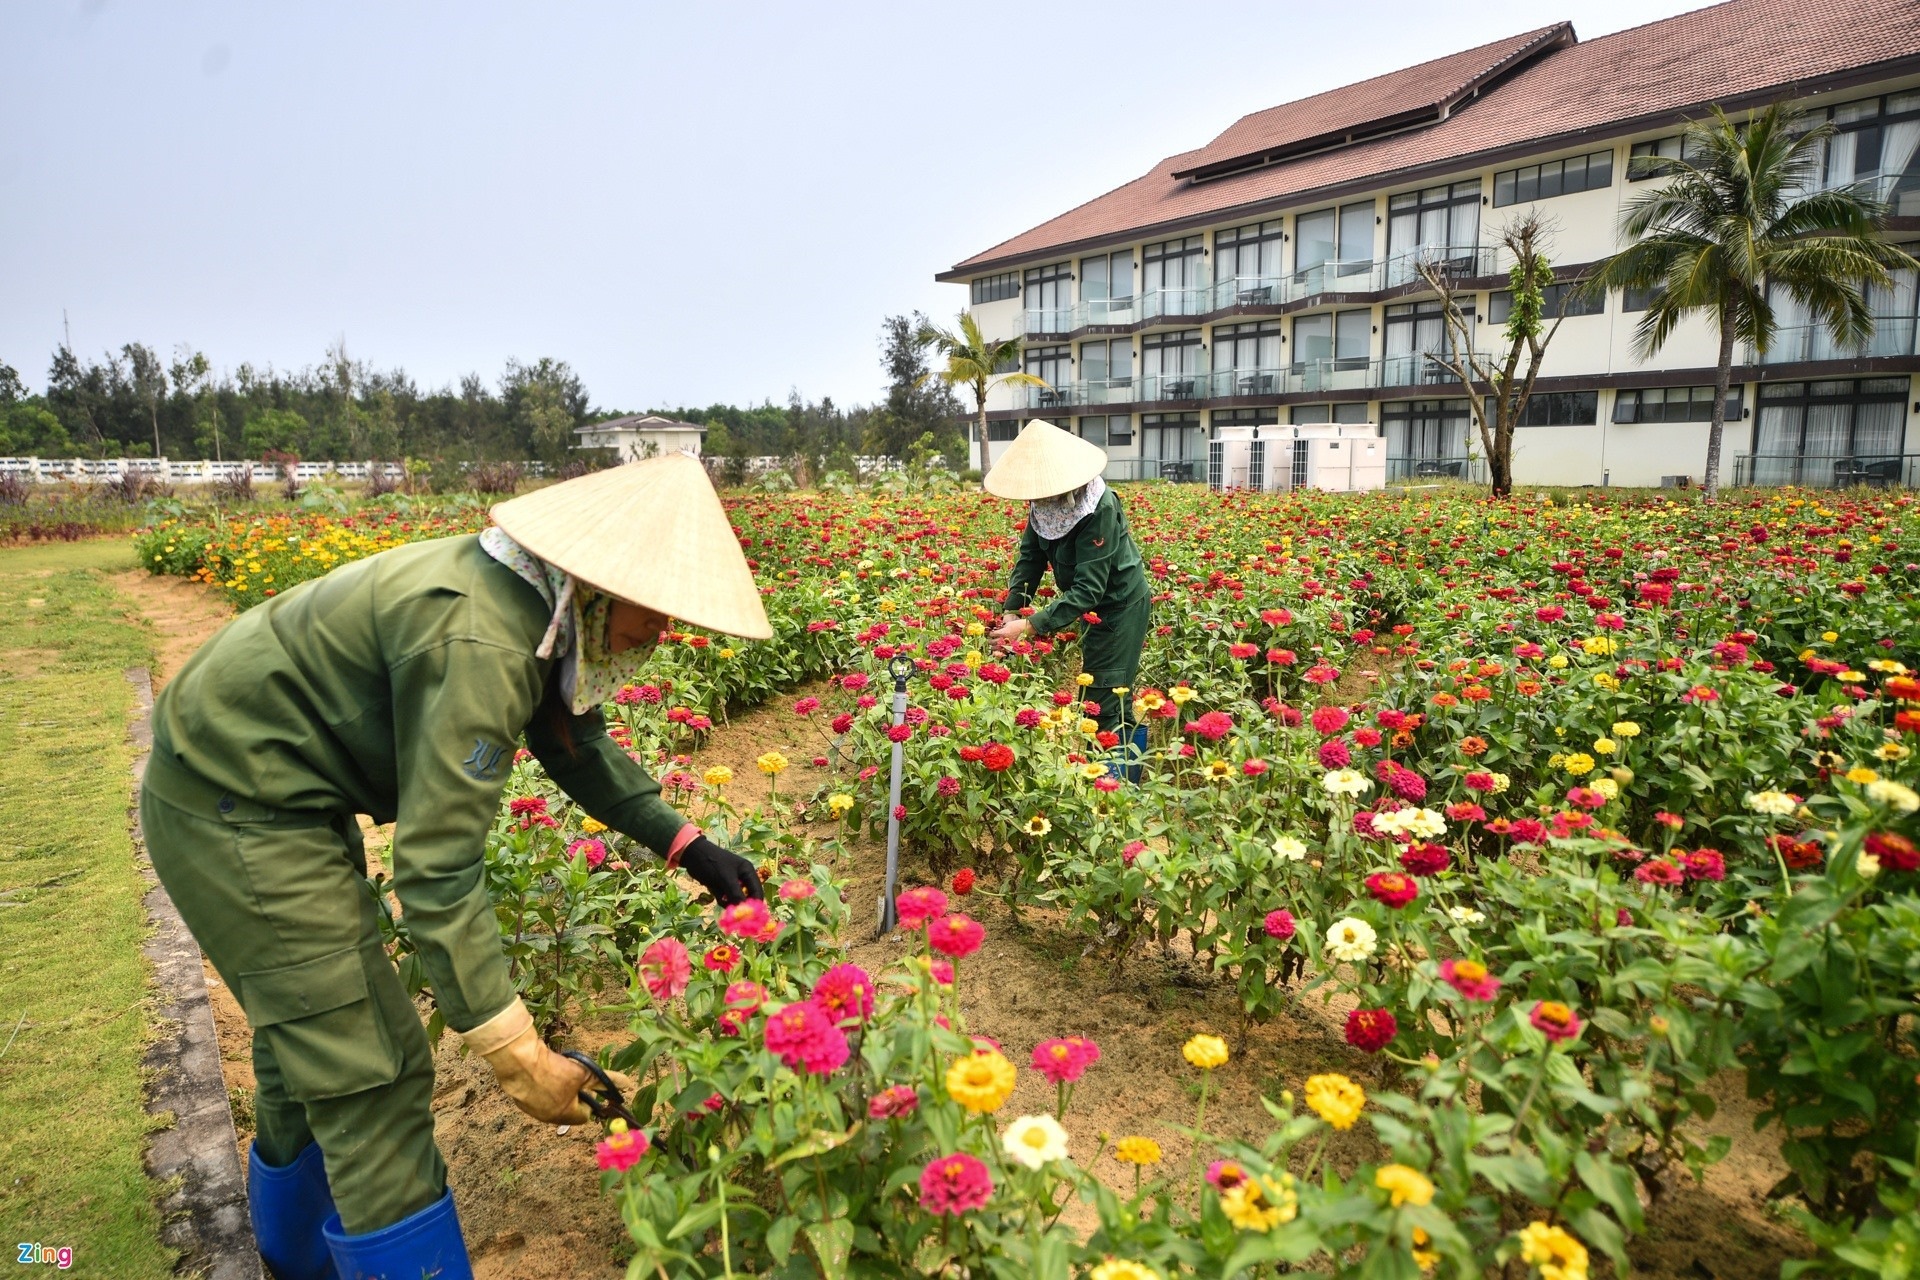 Many kinds of flowers are planted in the resort to create diverse landscapes. Some flowers are used to decorate the resort.